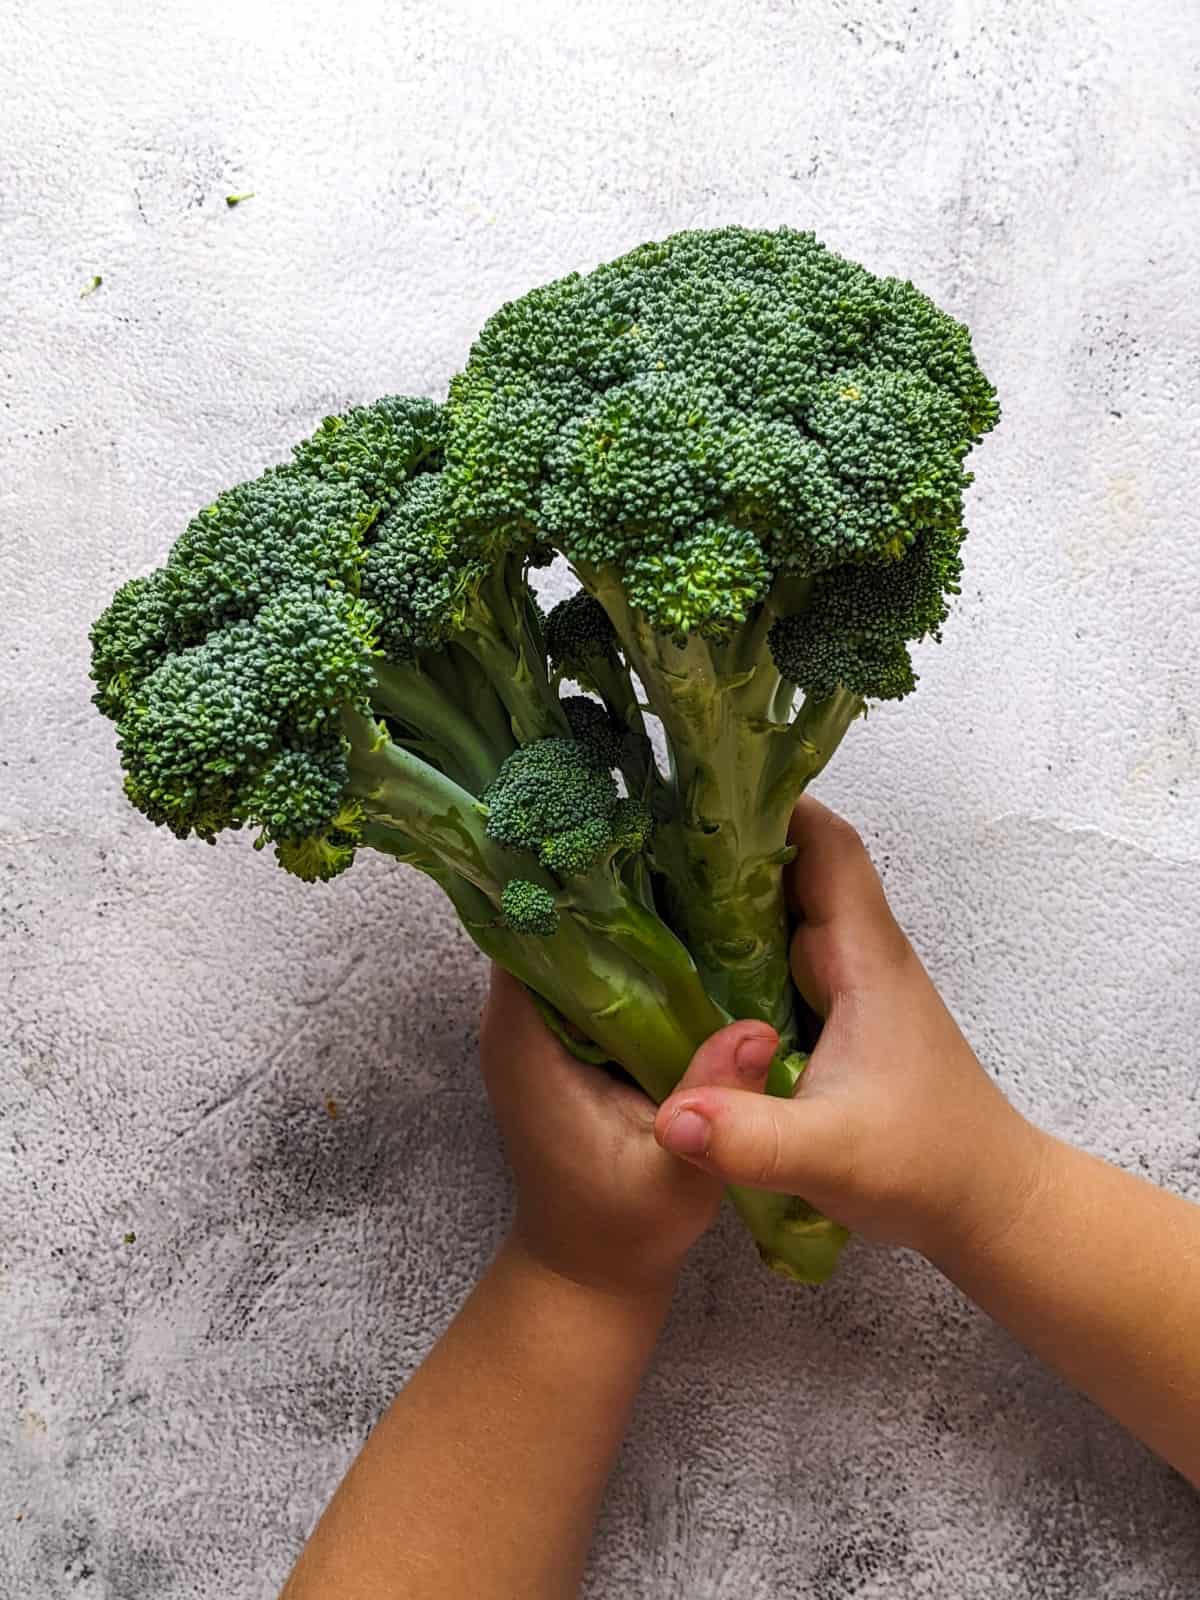 Child holding two broccoli stems.